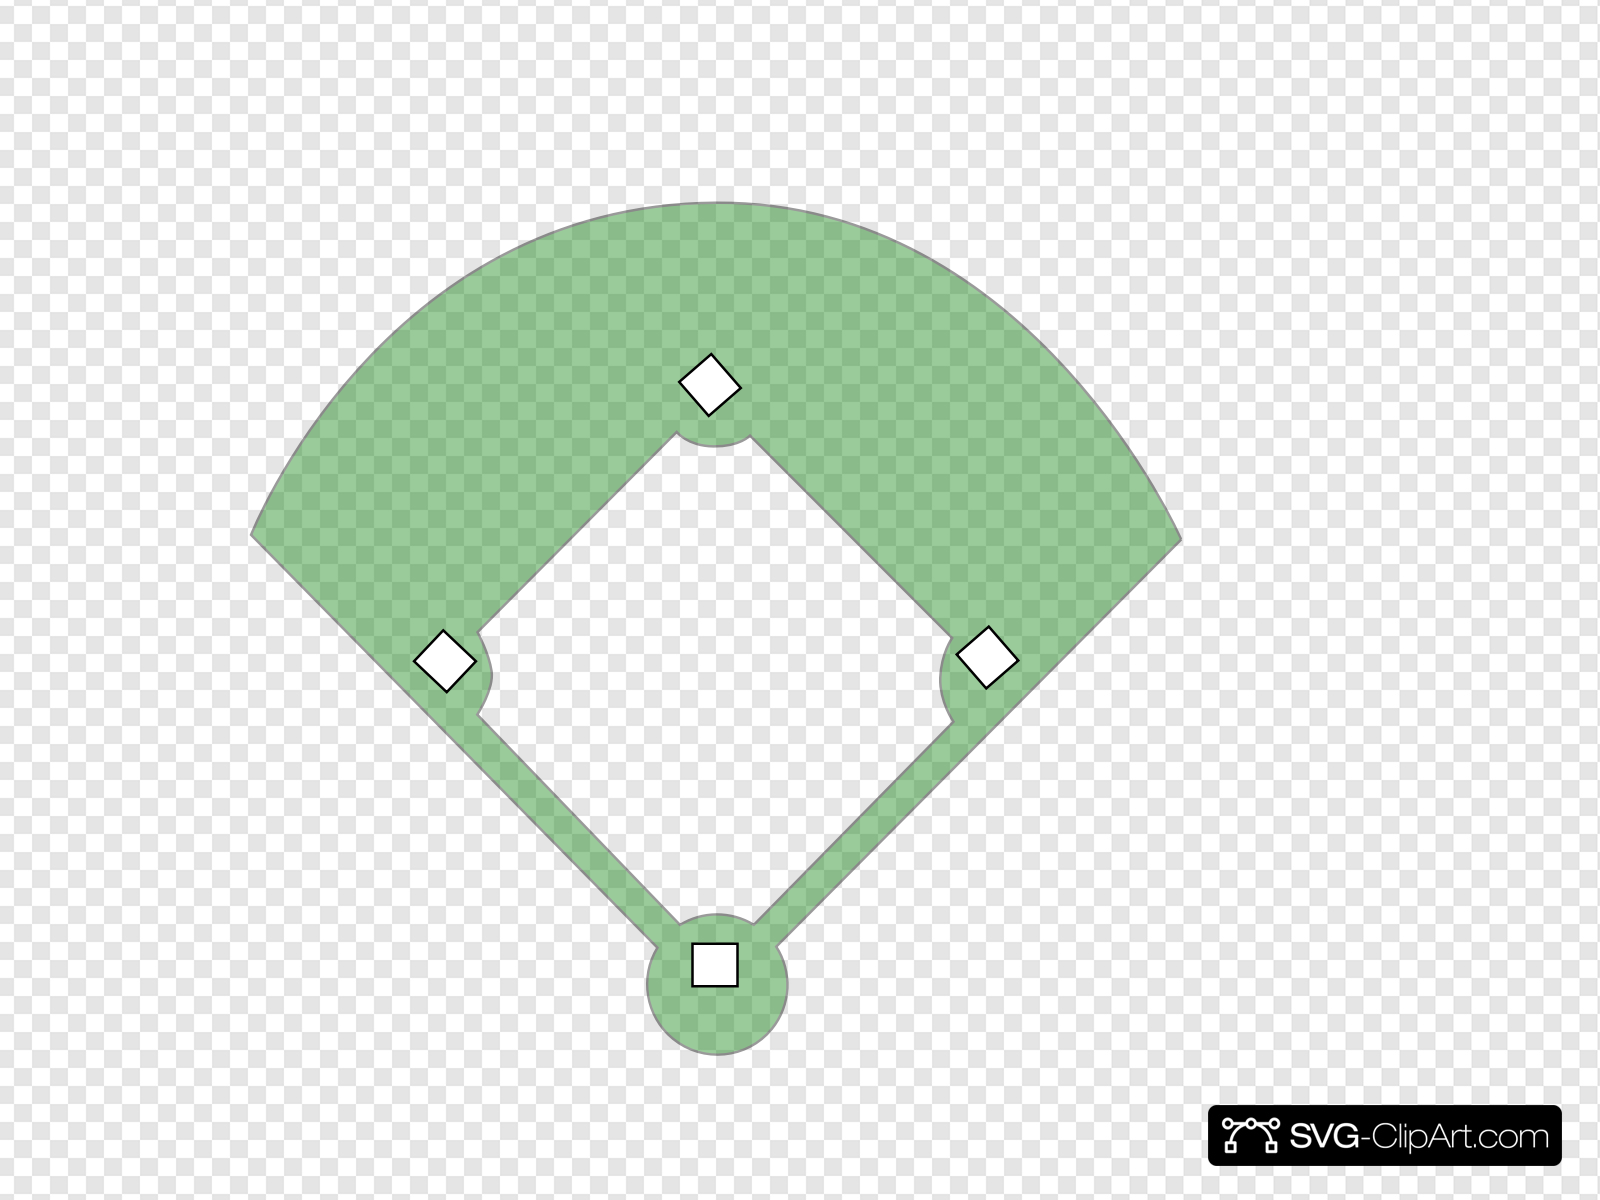 Epic Baseball Field Clip art, Icon and SVG